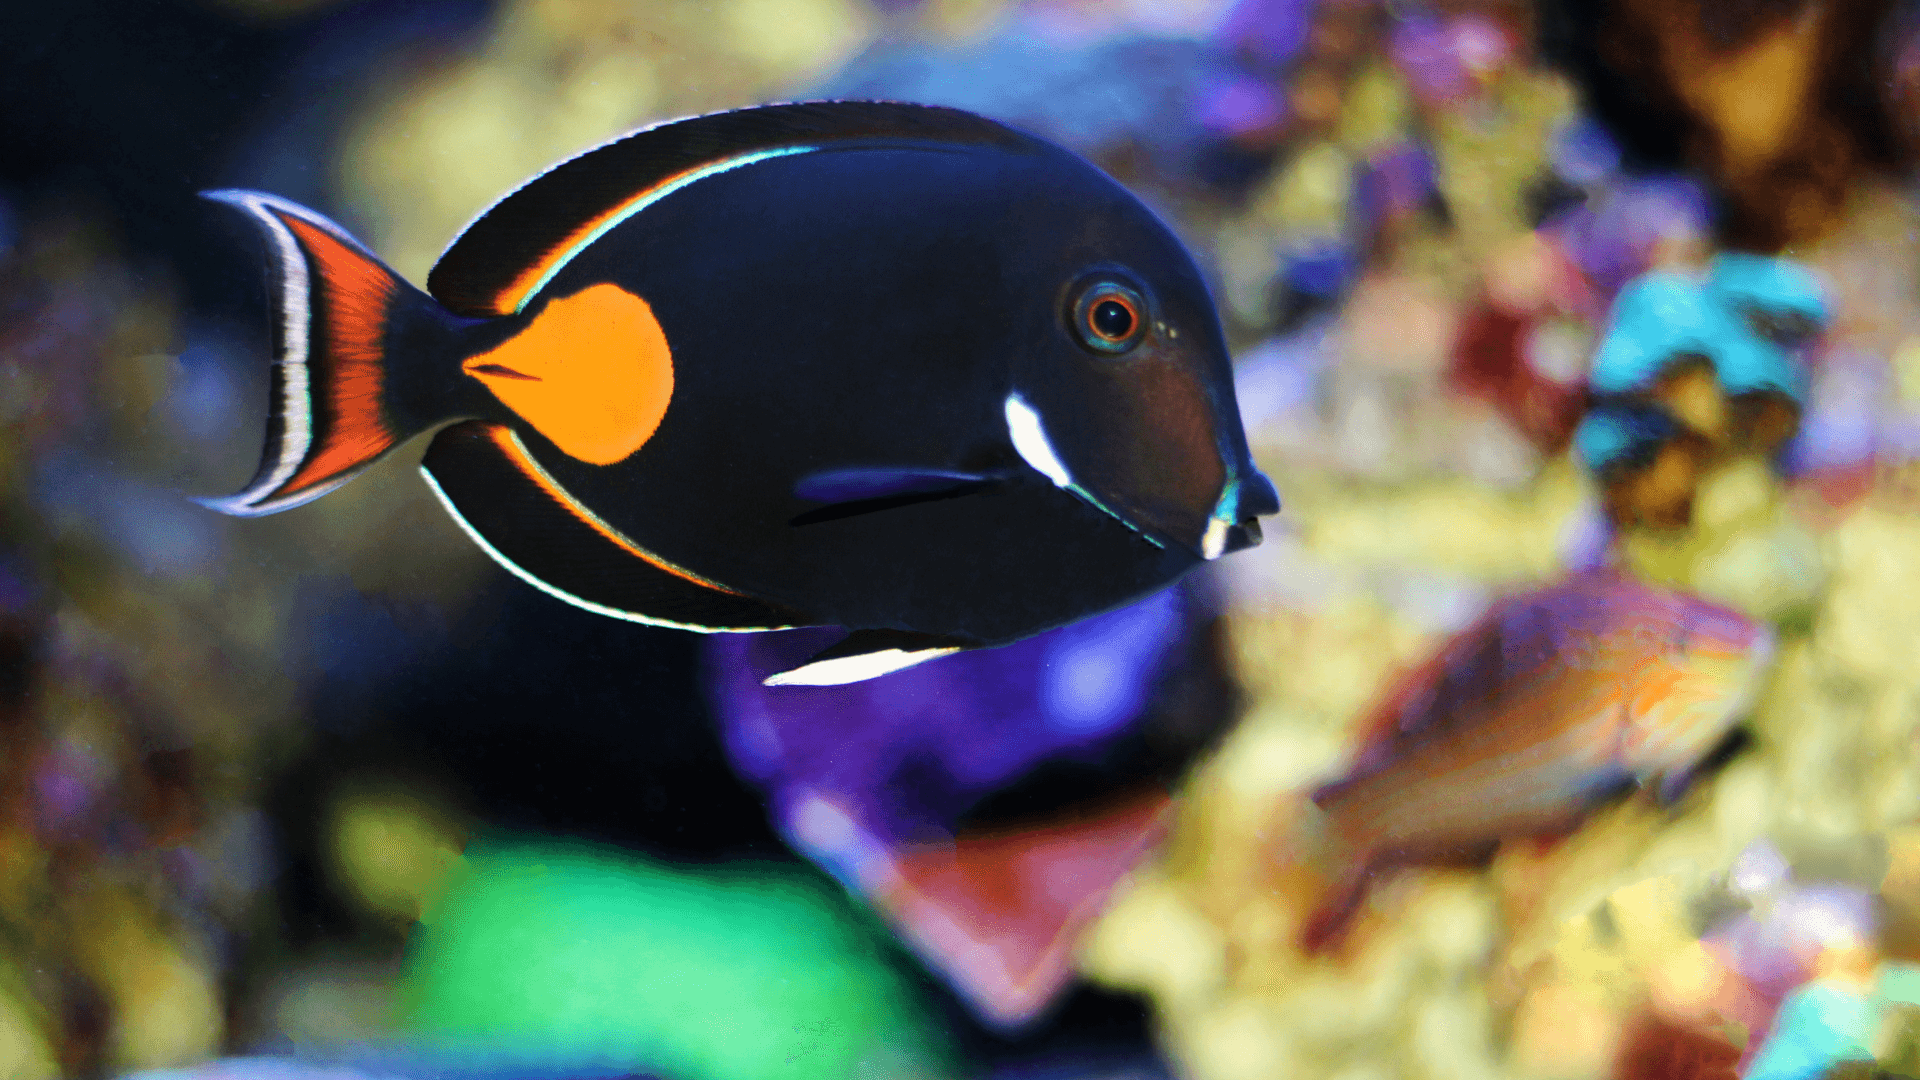 An image of a Distinguishing Butterflyfish, Angelfish, and Surgeonfish